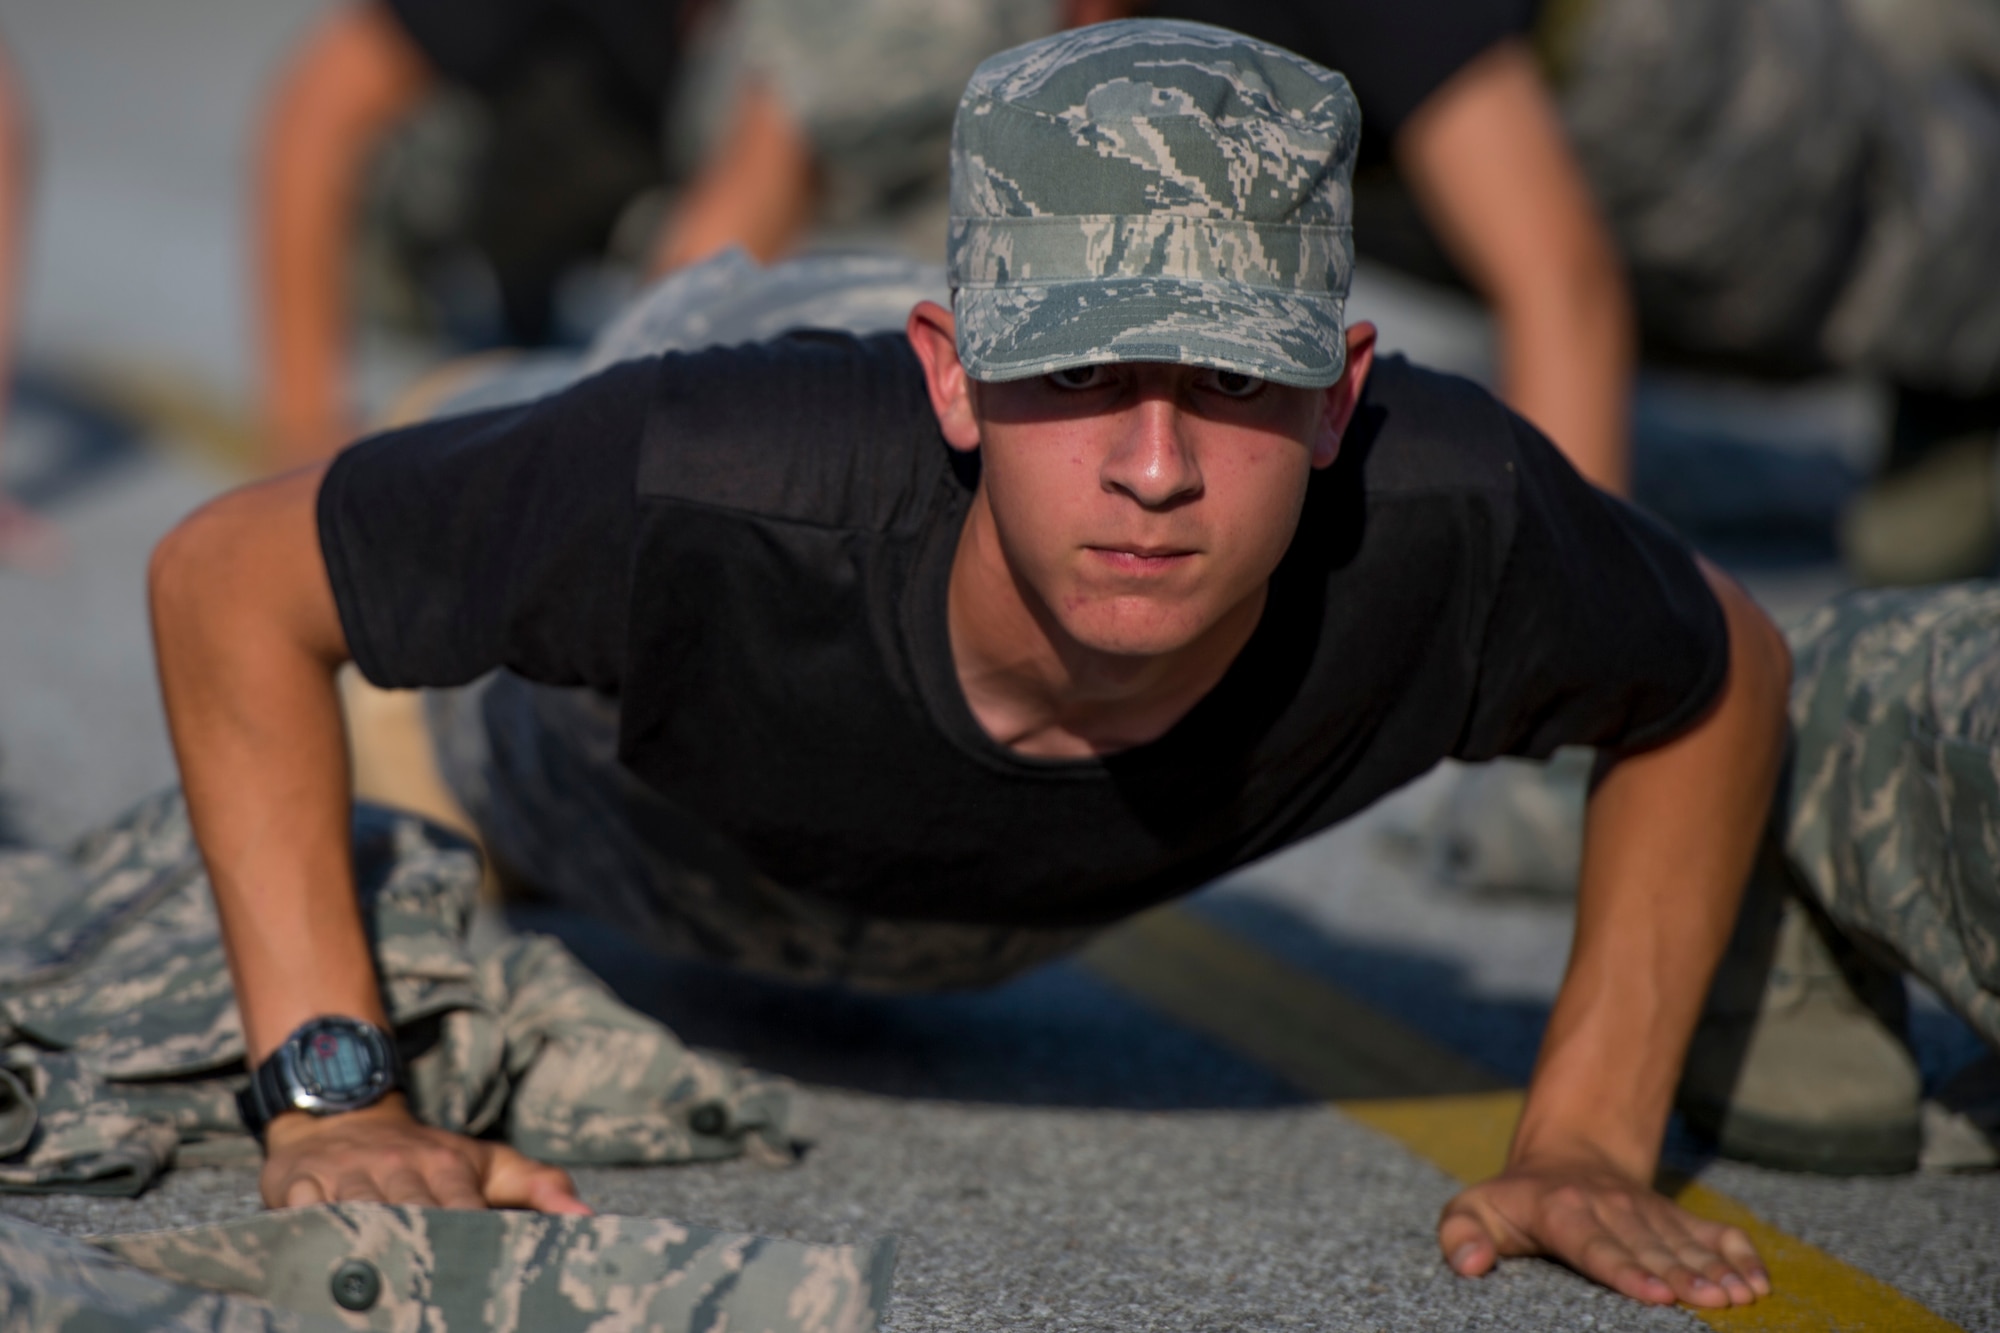 A Junior ROTC cadet performs push-ups with his wingmen during a JROTC Summer Leadership School trip to Hurlburt Field, Fla., June 26, 2017. More than 50 cadets visited the base to engage in a variety of team-building and leadership skill-developing exercises under the guidance of Air Commandos from across Hurlburt Field. (U.S. Air Force photo by Staff Sgt. Victor J. Caputo)